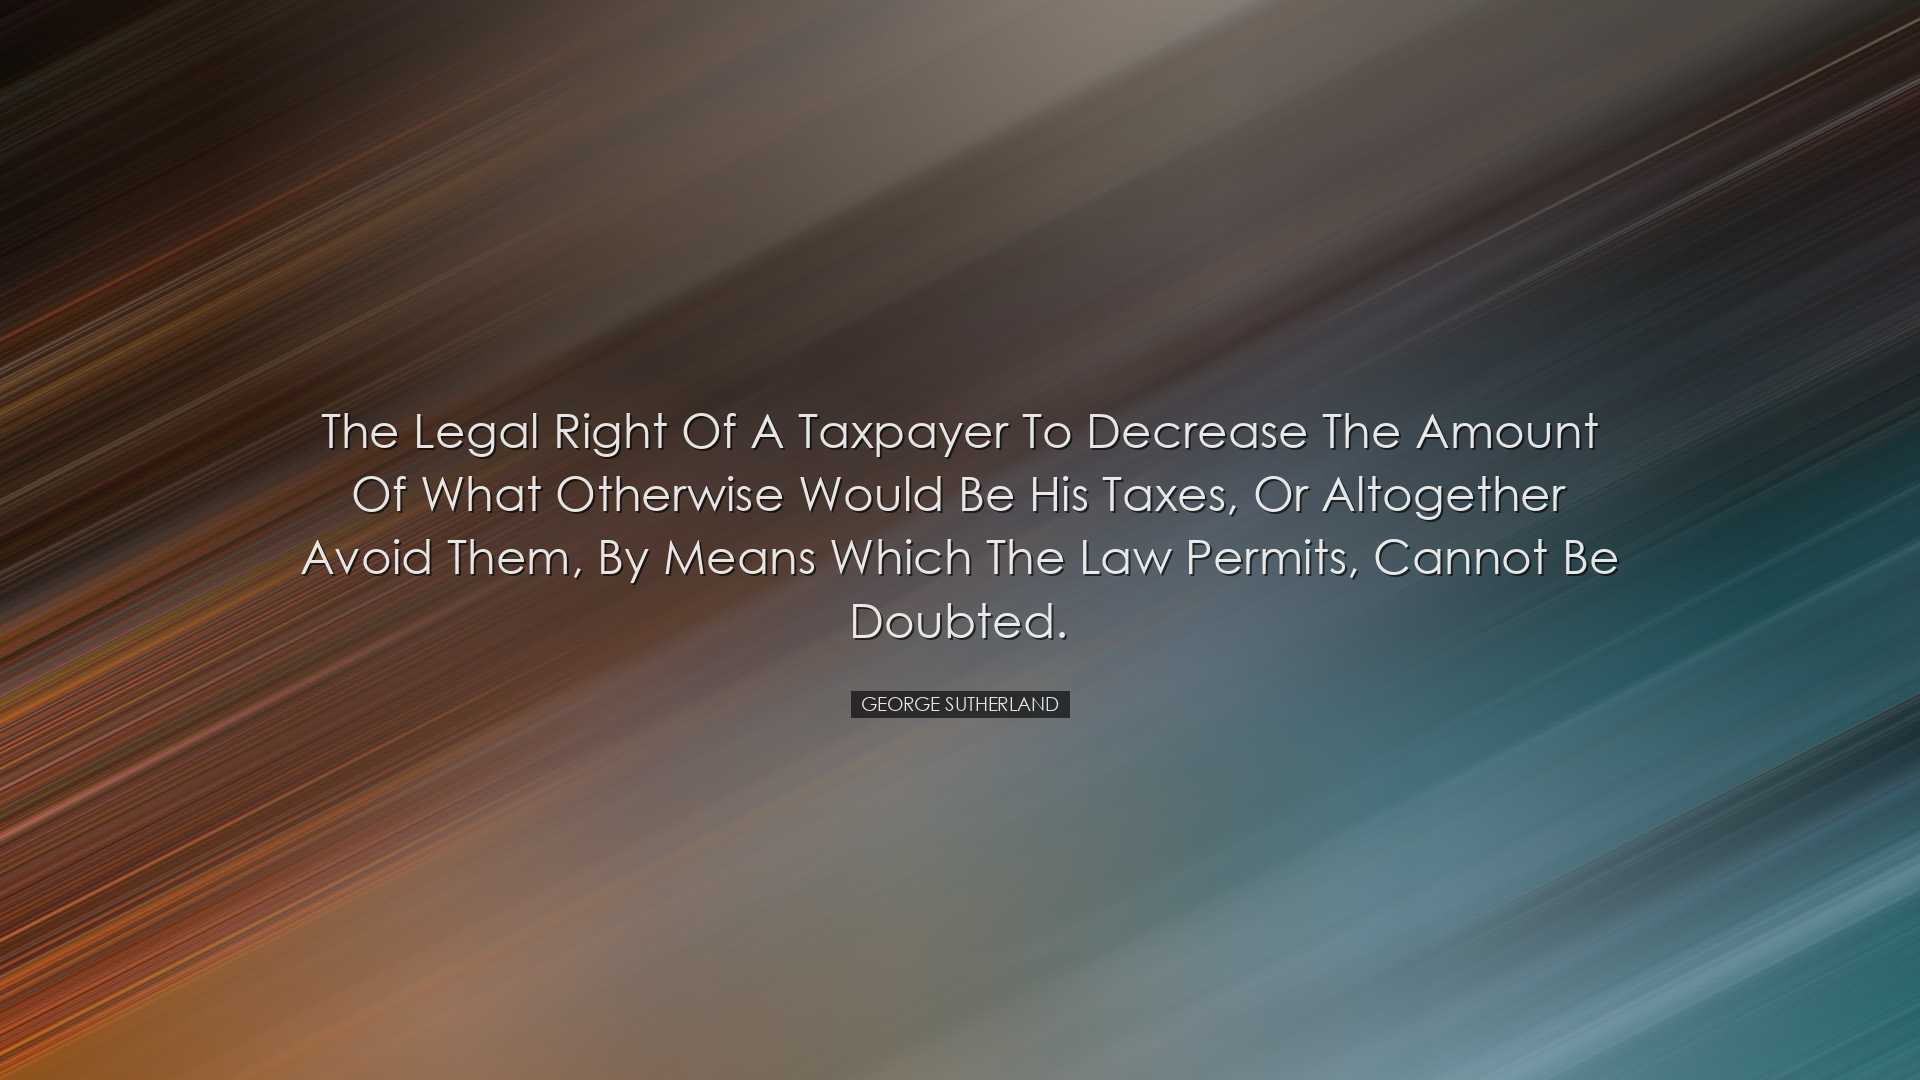 The legal right of a taxpayer to decrease the amount of what other